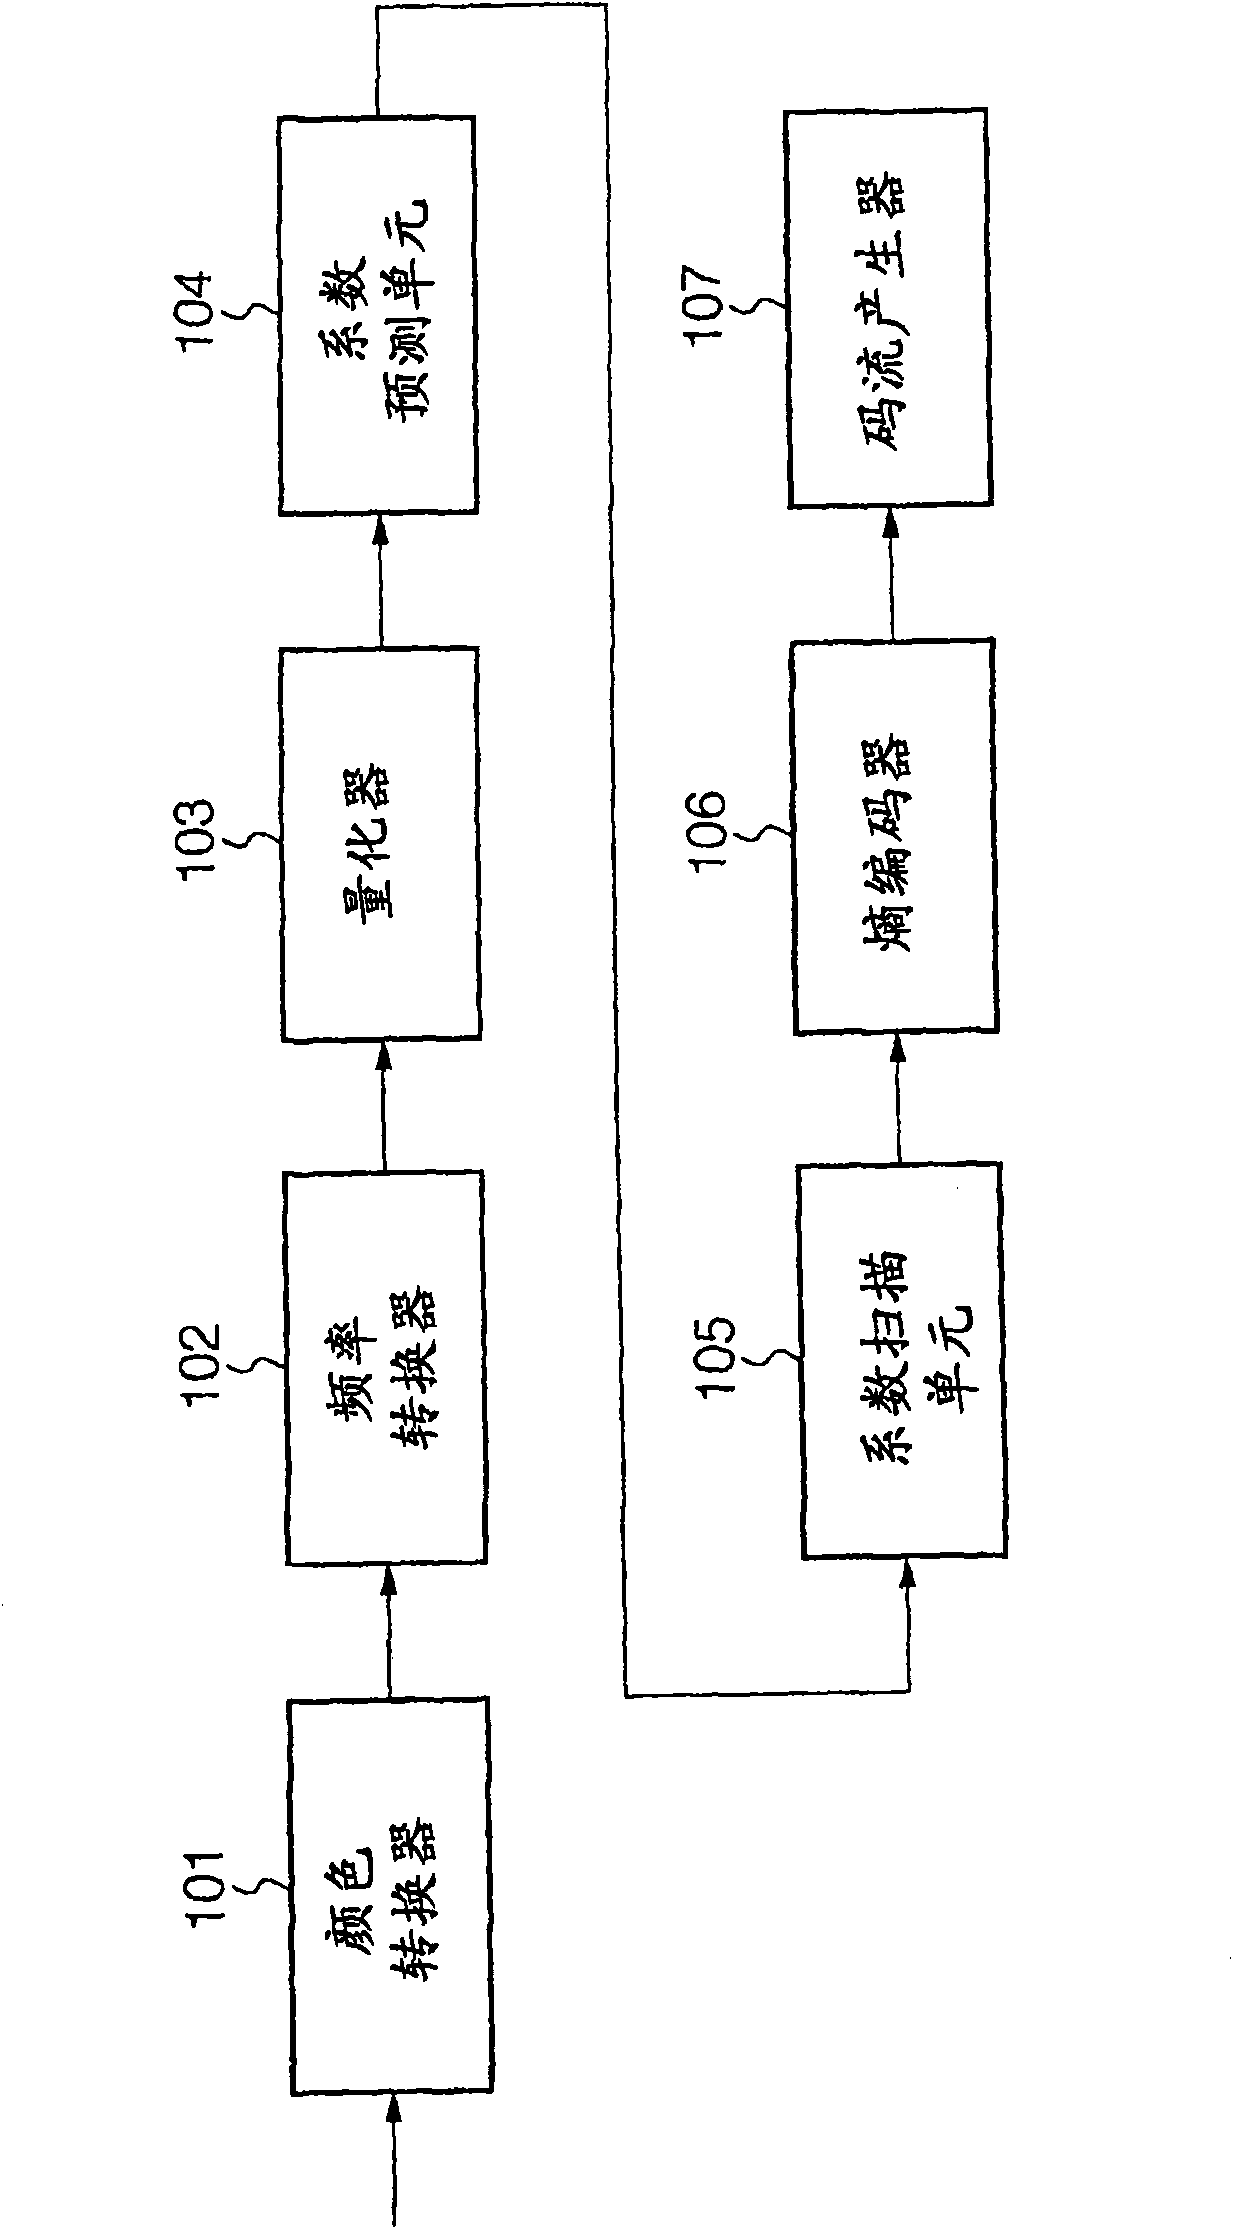 Image encoding apparatus, image decoding apparatus, and methods of controlling the same